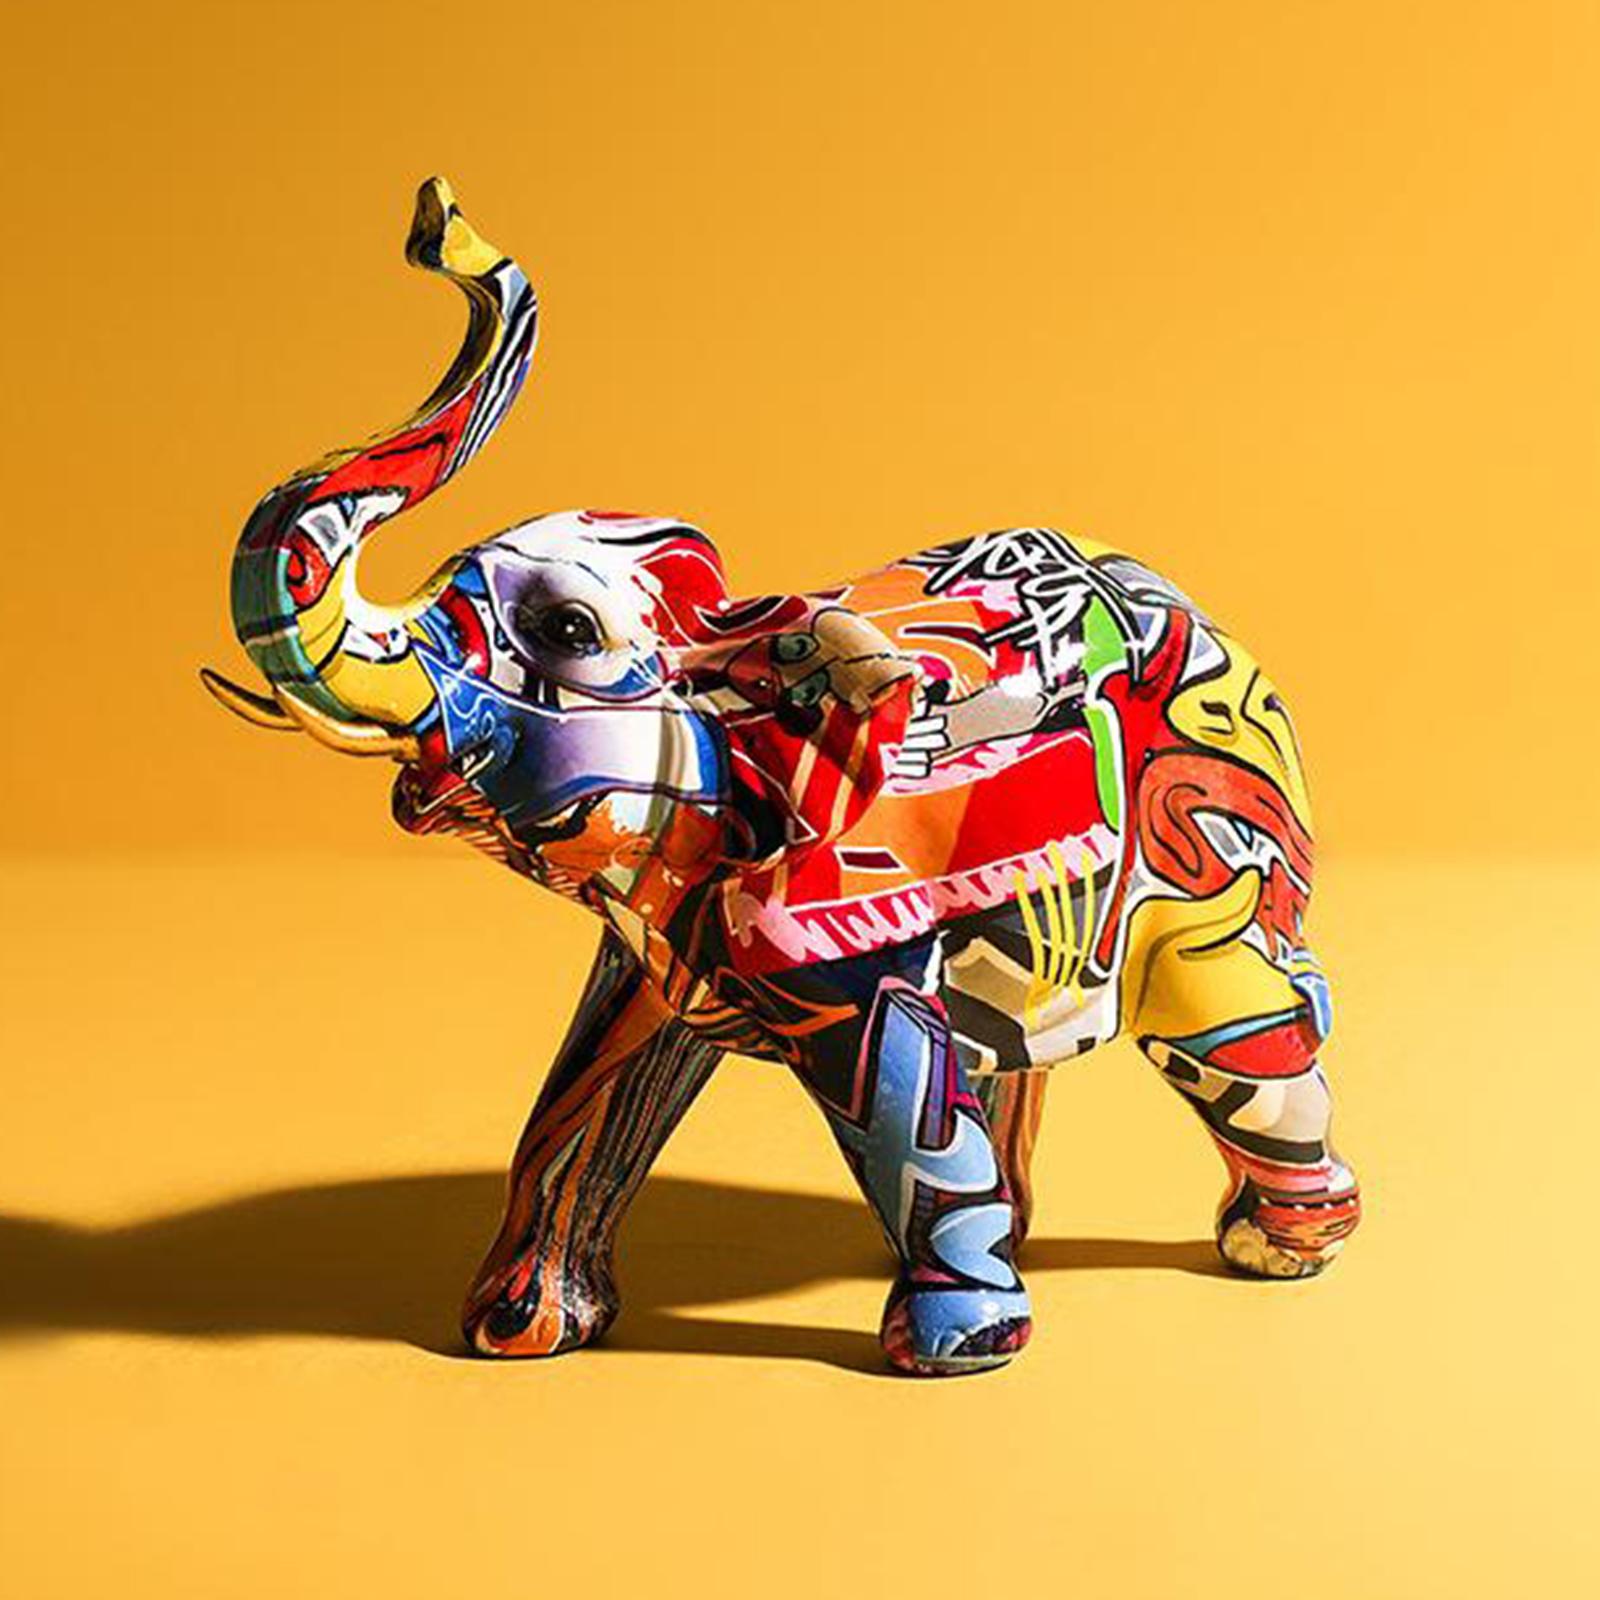 Colorful Elephant Figurine Resin Craft Animal Statue Sculpture for Home Decoration